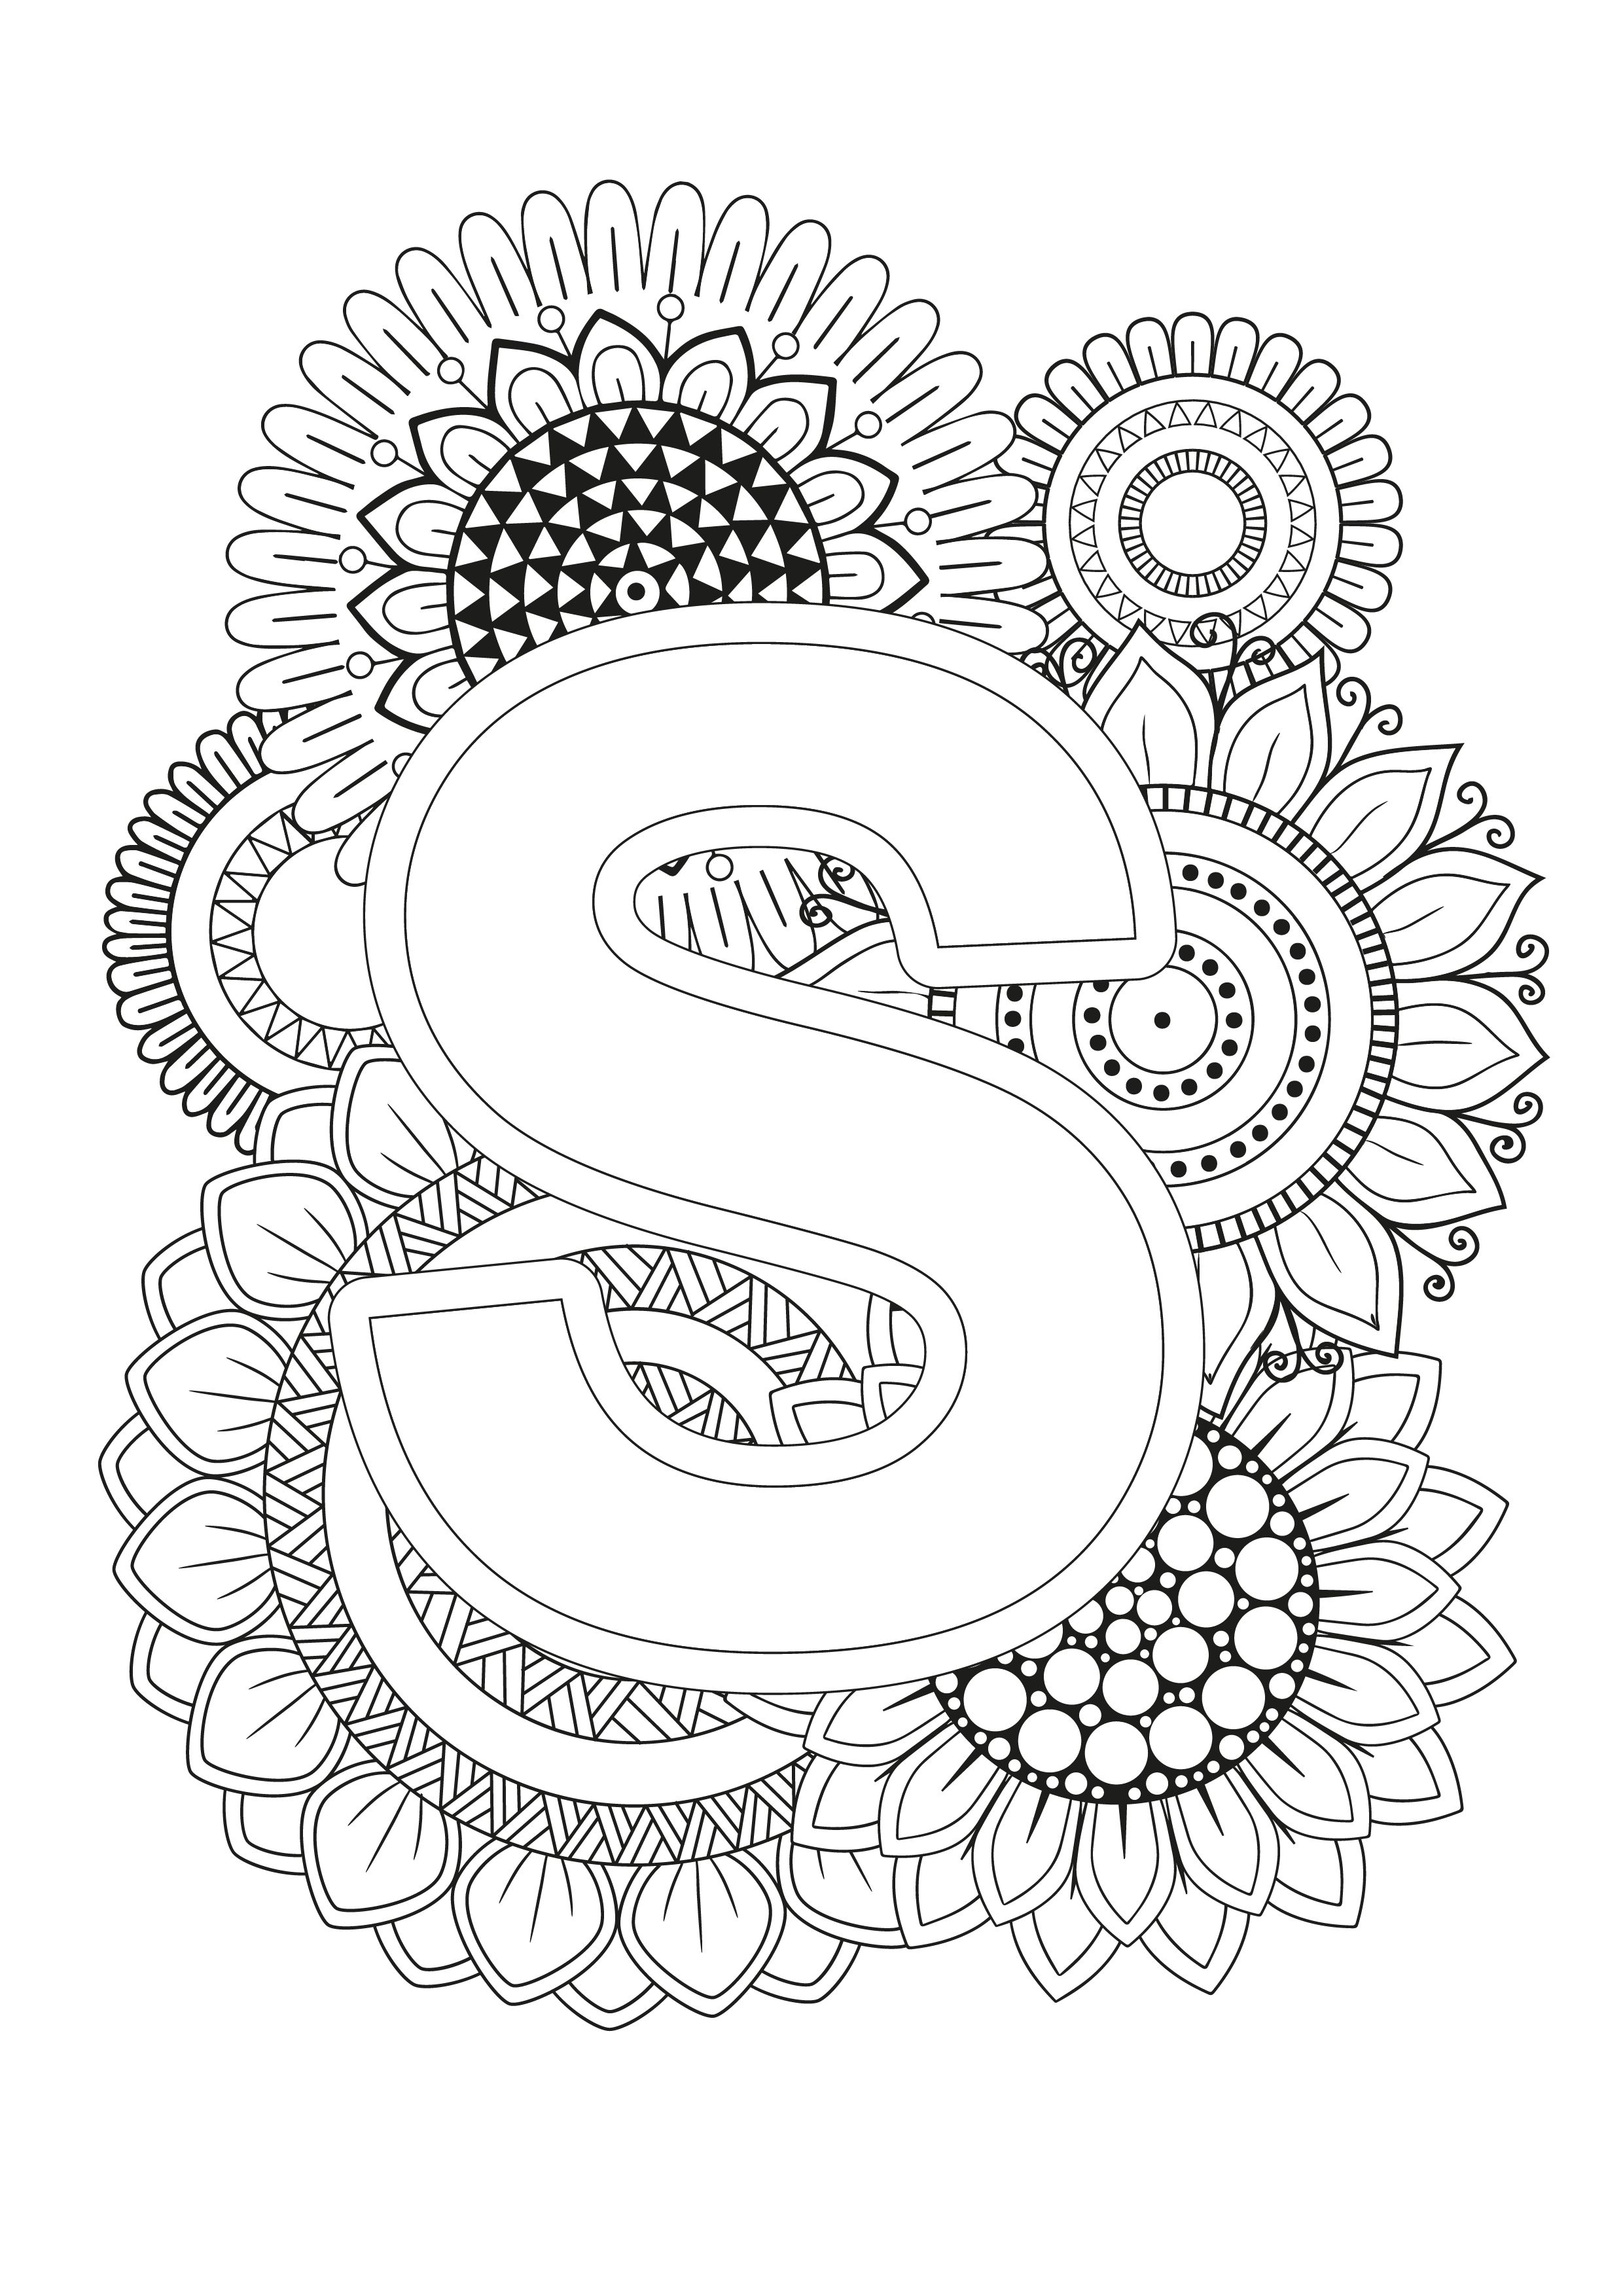 Mindfulness Coloring Page - Alphabet in ...pinterest.nz